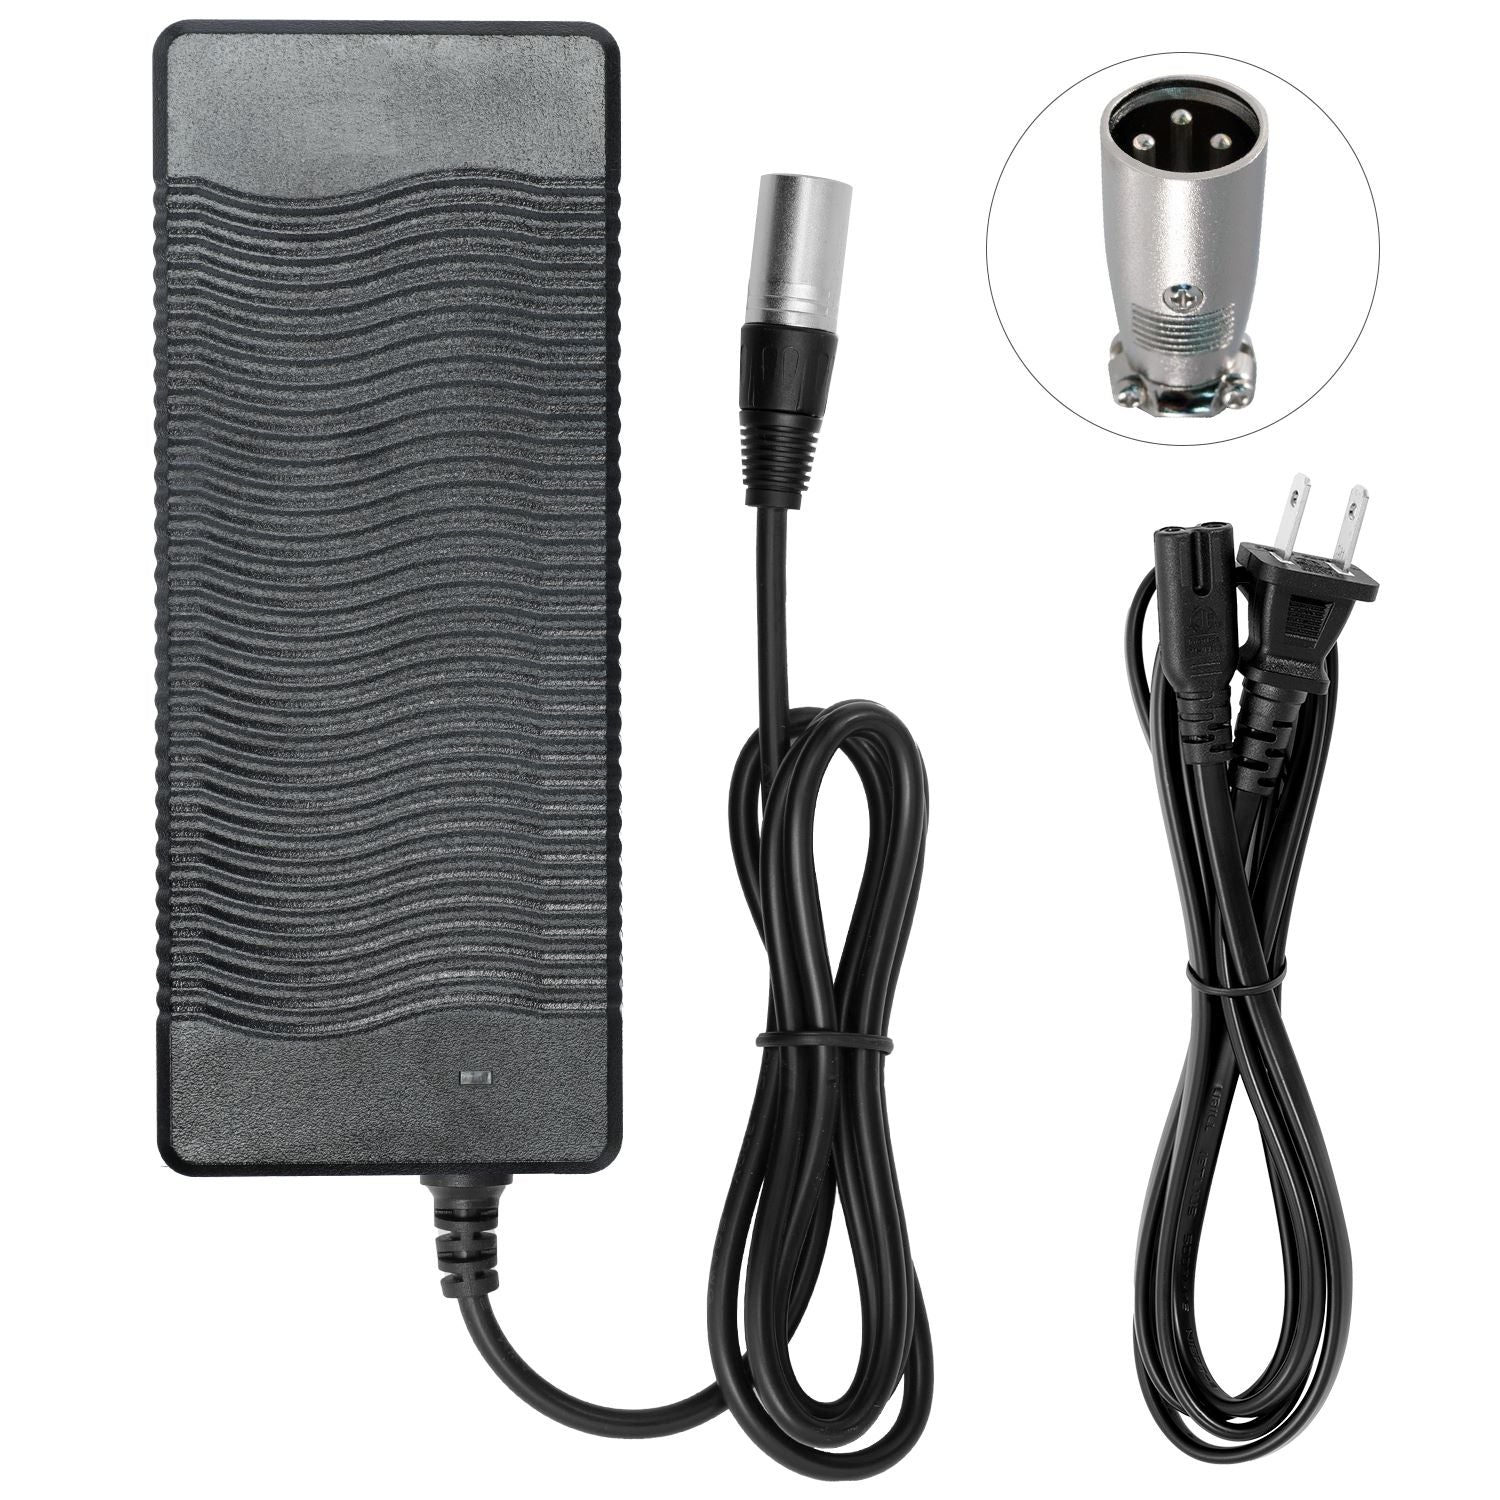 Charger for Pedego Tandem Cruiser eBike